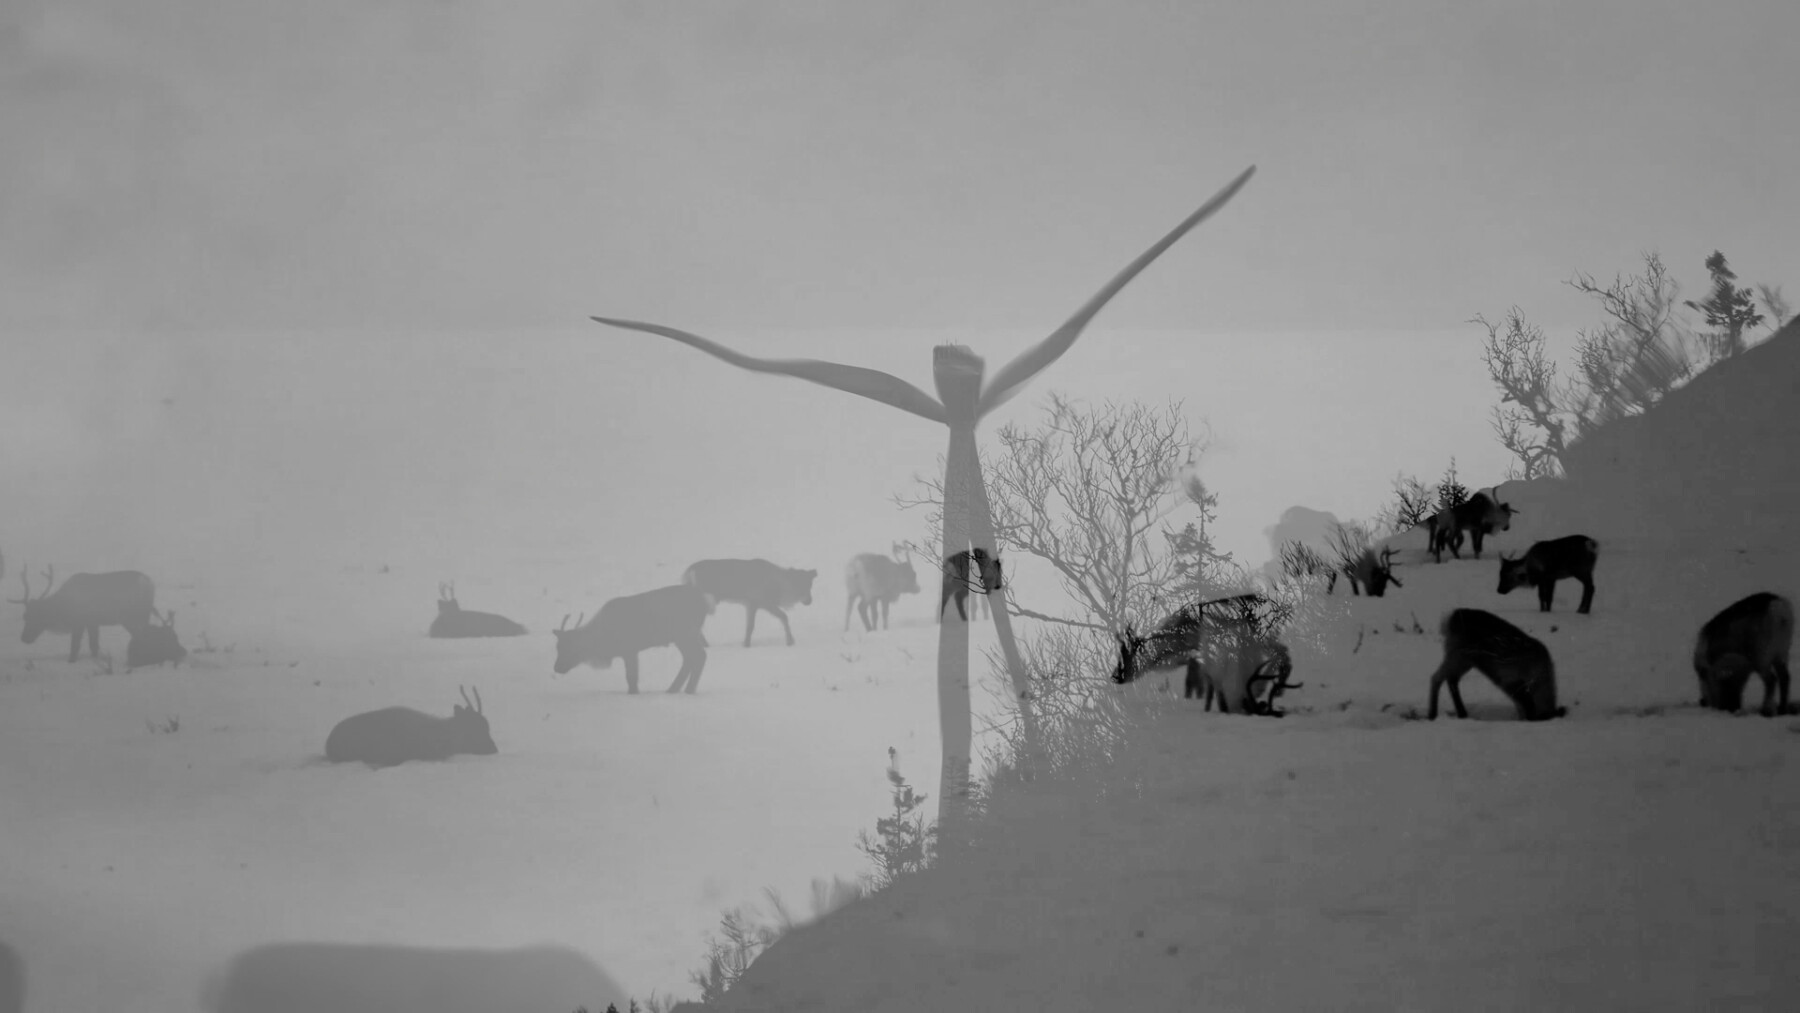 Two black-and-white pictures are superimposed upon each other: One shows grazing reindeer, and the other shows a wind turbine.